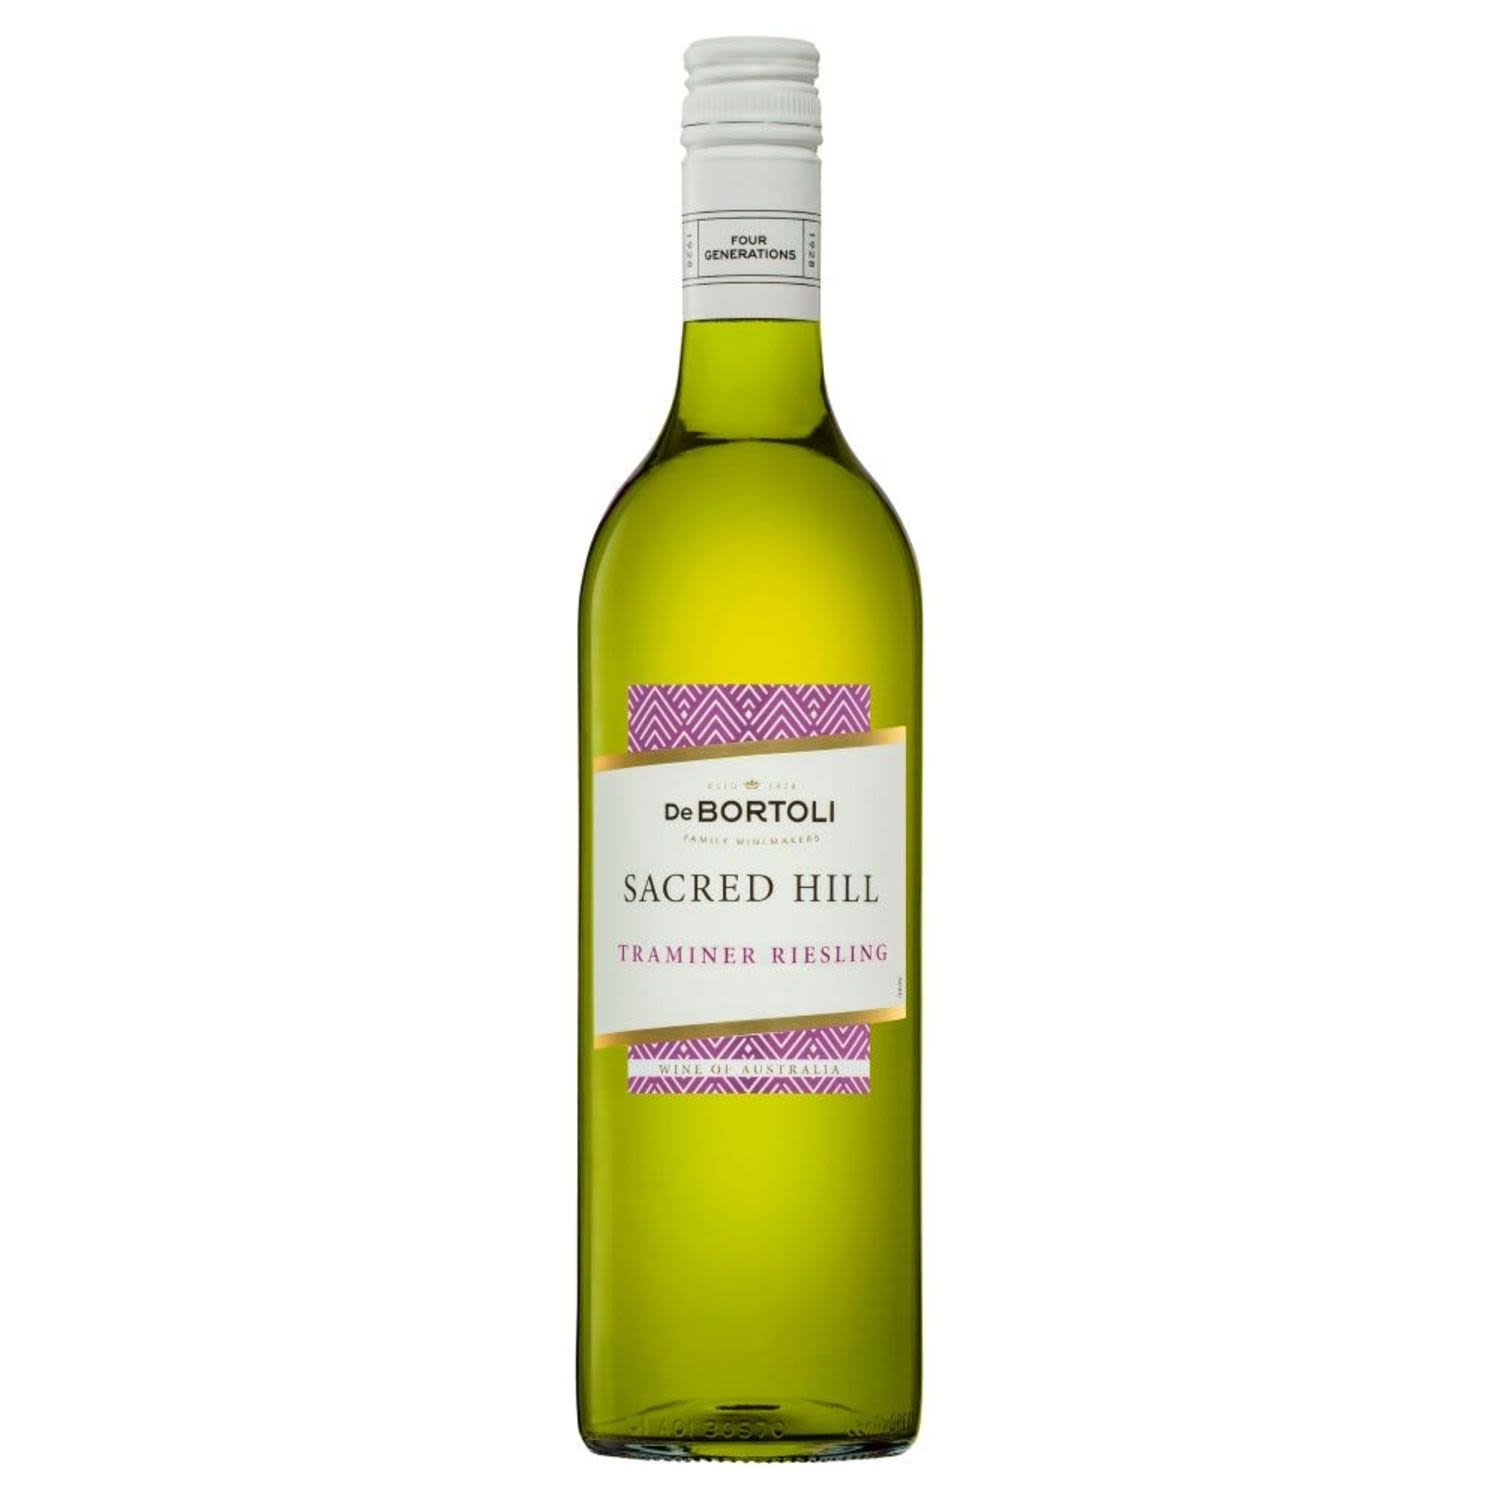 An exciting blend of sweet and dry. Full of fruity grapiness & crisp citrus fruits it's like biting into a fresh white grape.<br /> <br />Alcohol Volume: 12.00%<br /><br />Pack Format: Bottle<br /><br />Standard Drinks: 7.1</br /><br />Pack Type: Bottle<br /><br />Country of Origin: Australia<br /><br />Region: Riverina<br /><br />Vintage: Vintages Vary<br />